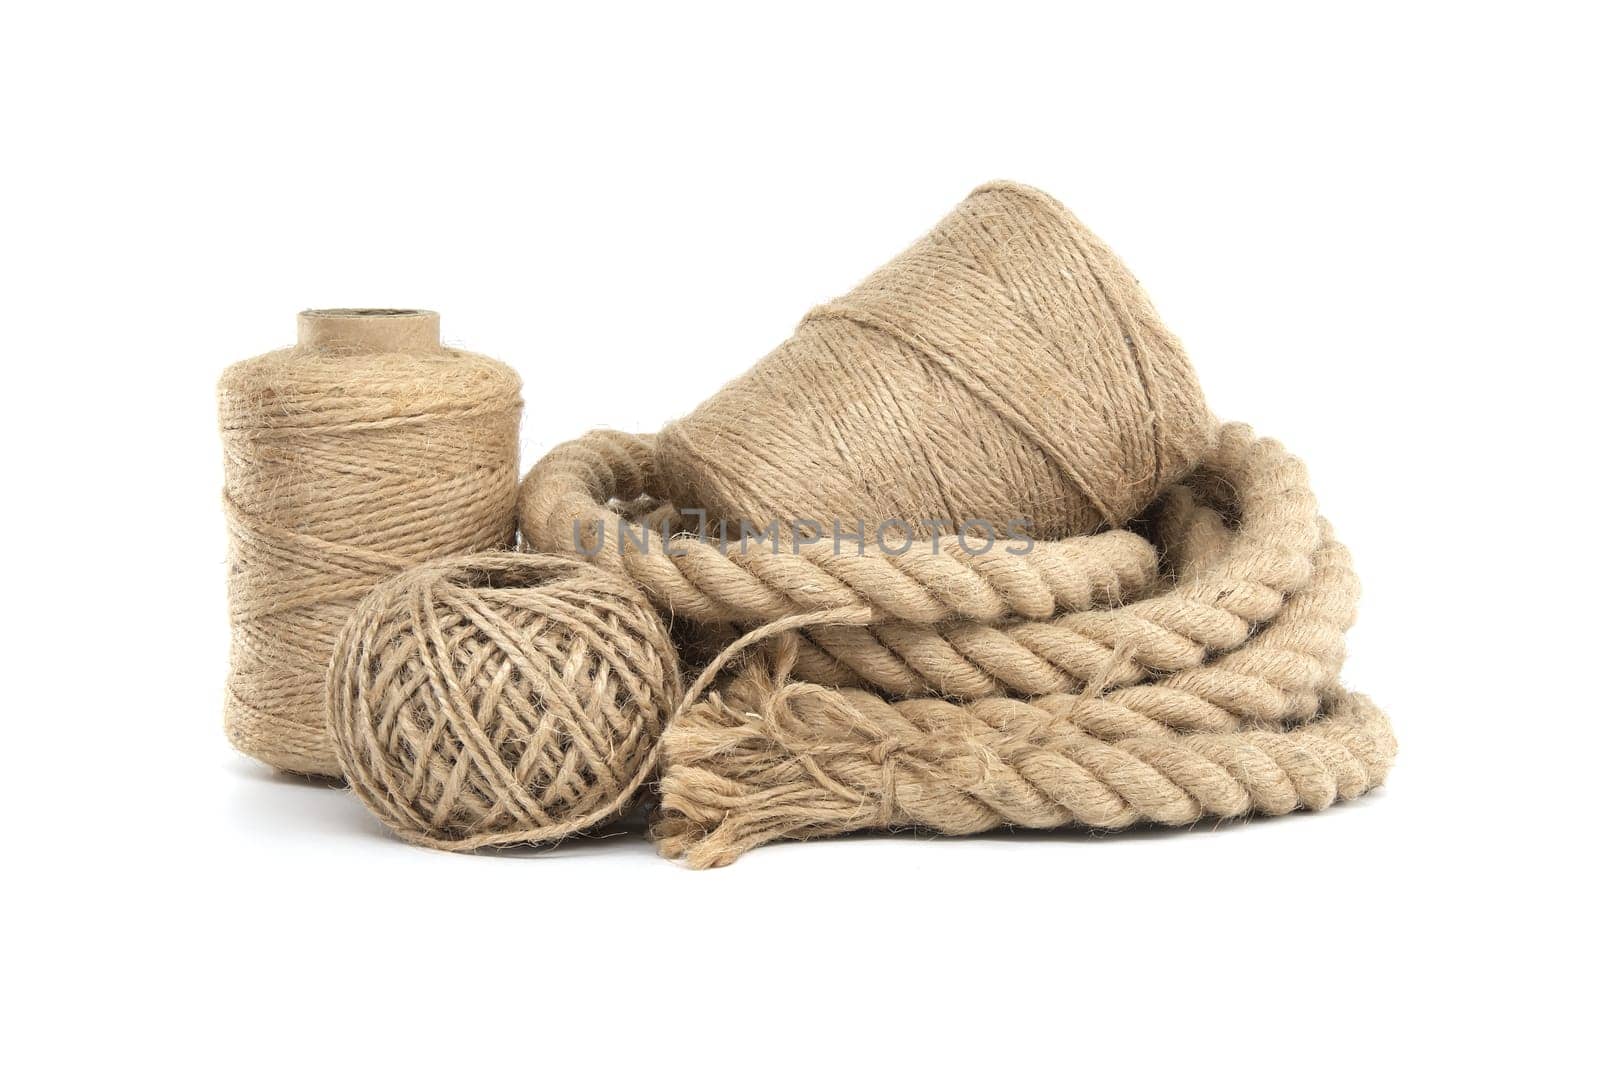 Collection of various rolls of natural jute rough rope and twine arranged on a white surface